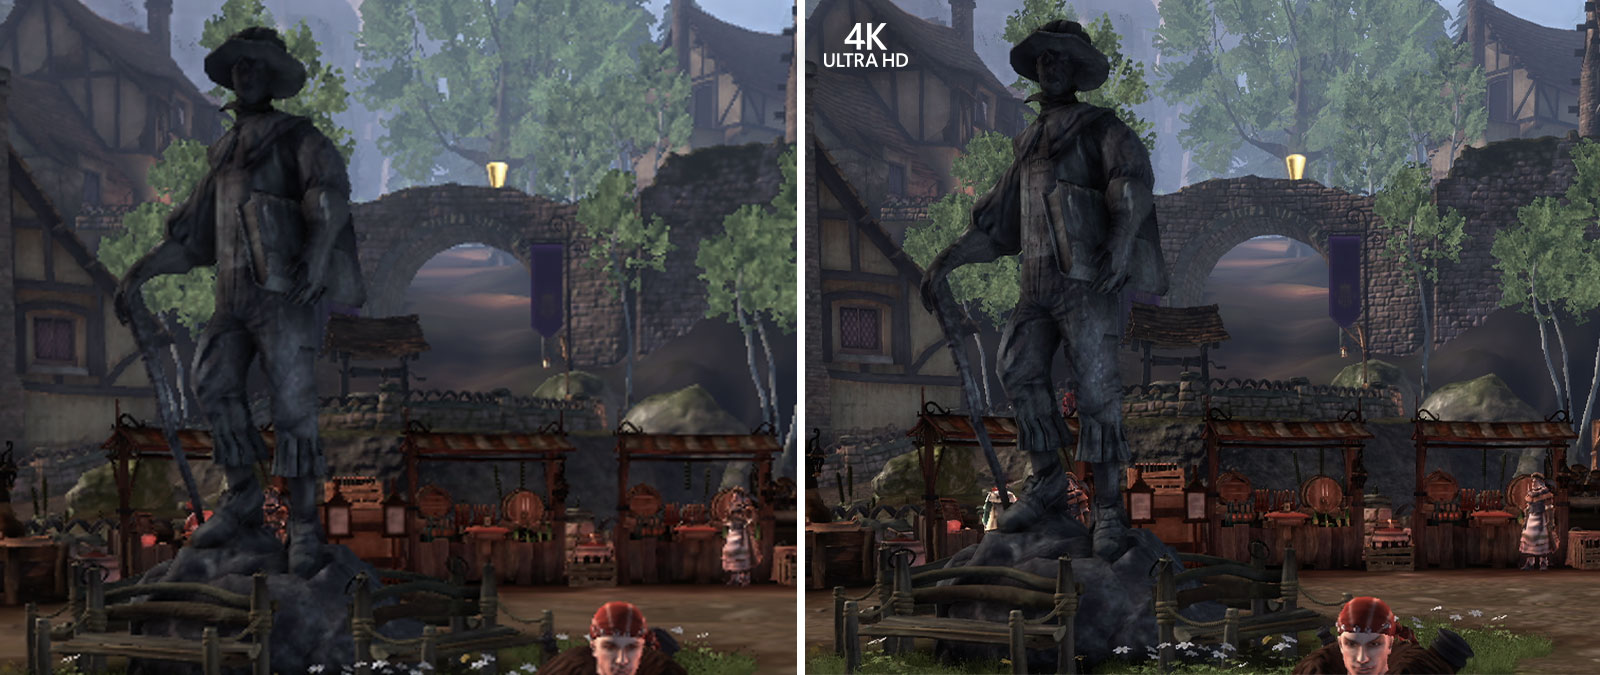 4K Ultra HD, Comparison screenshots of Fable Anniversary zoomed in to view the detail in the background